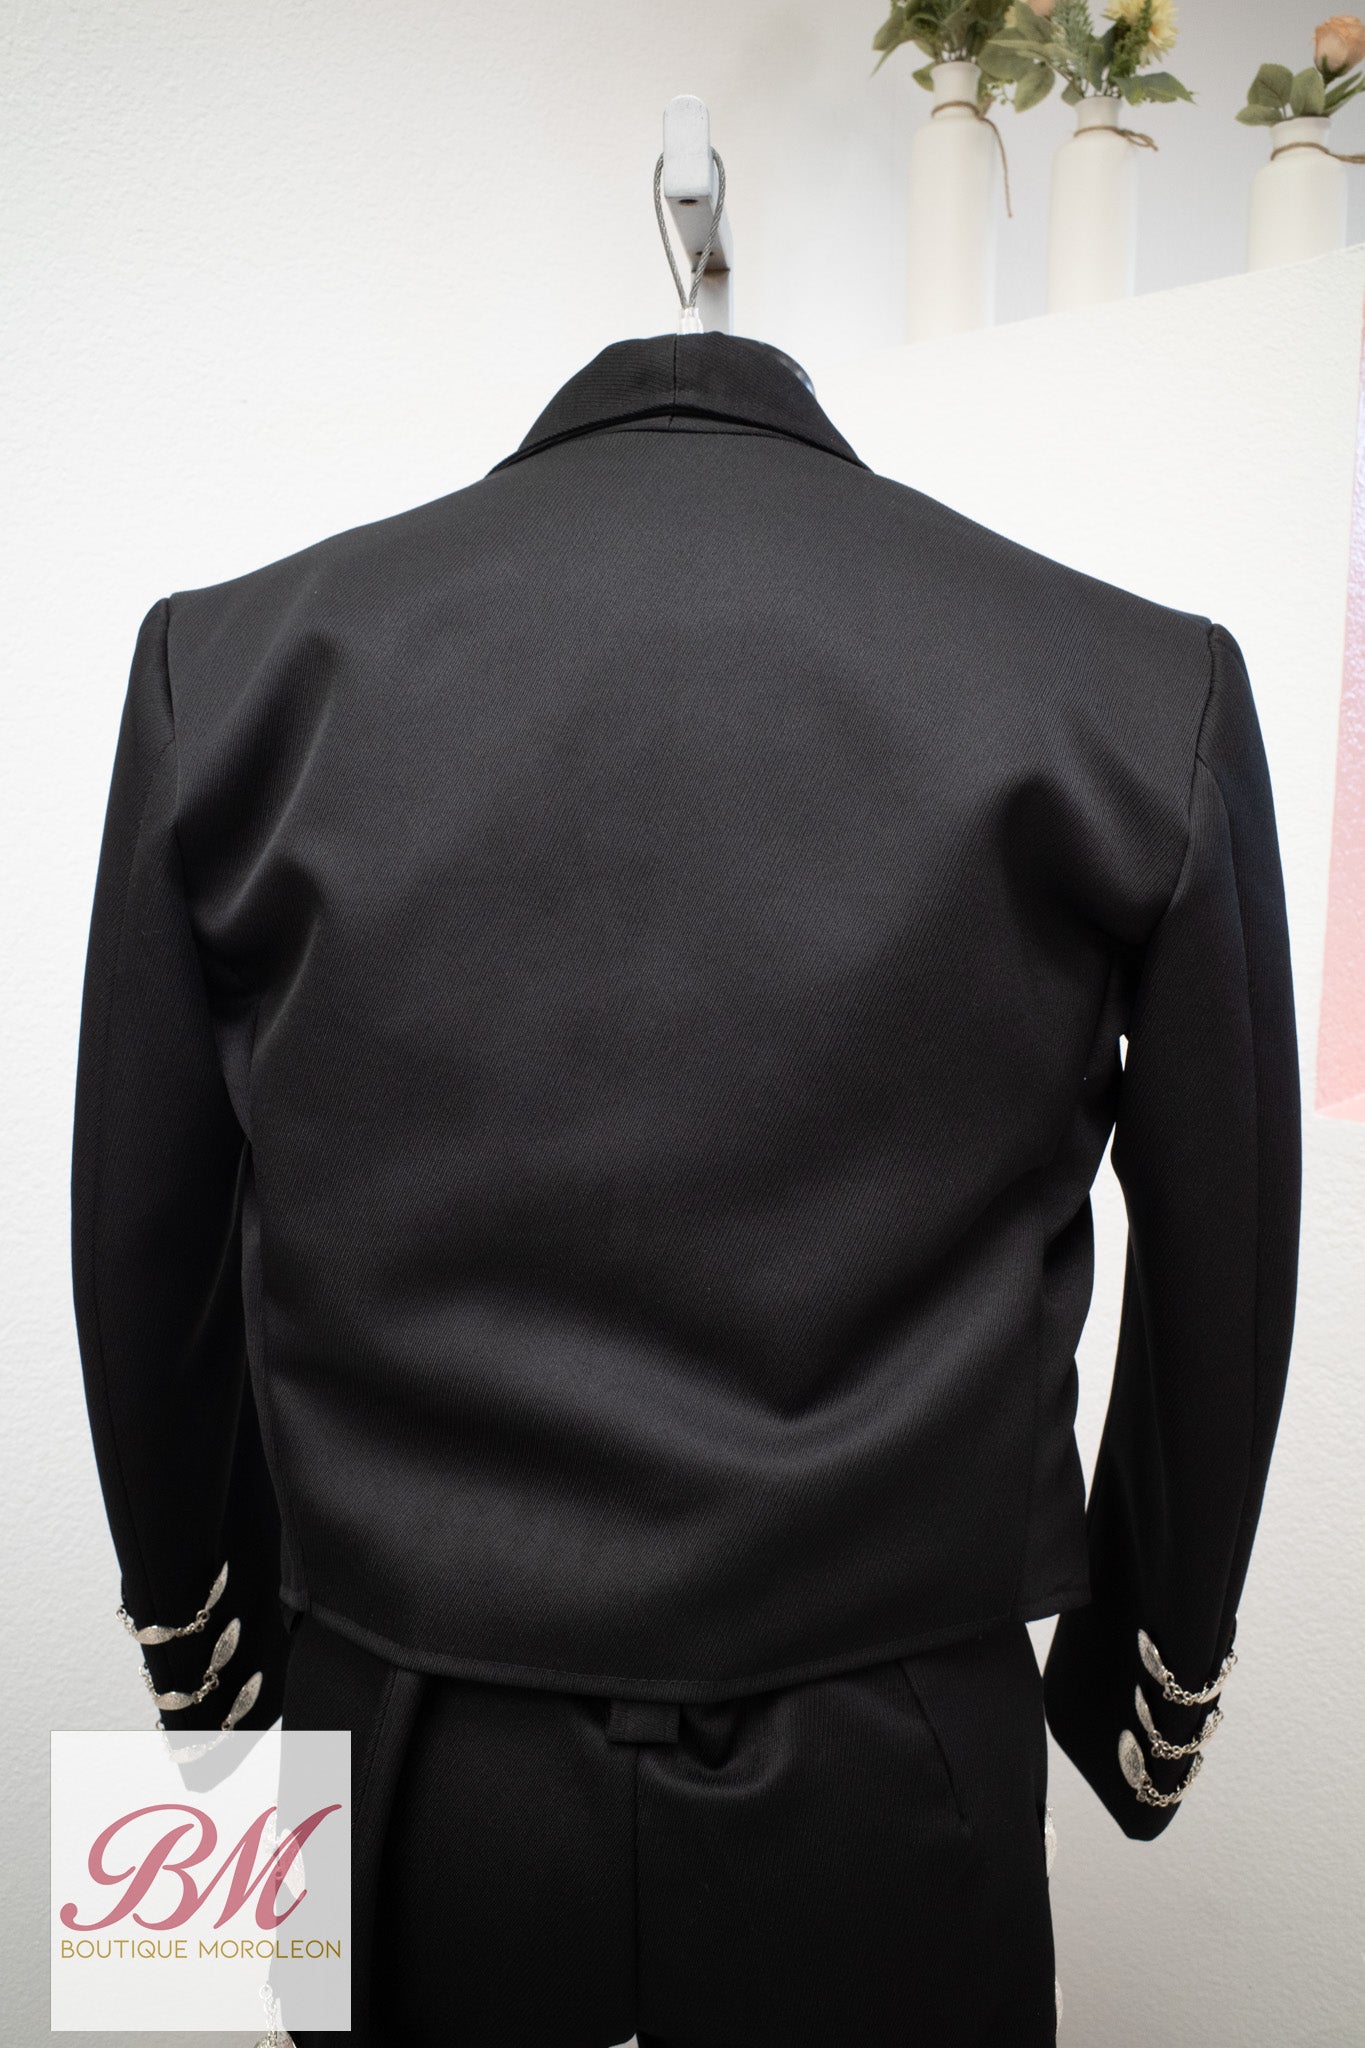 Black Charro Suit with Silver Buttons